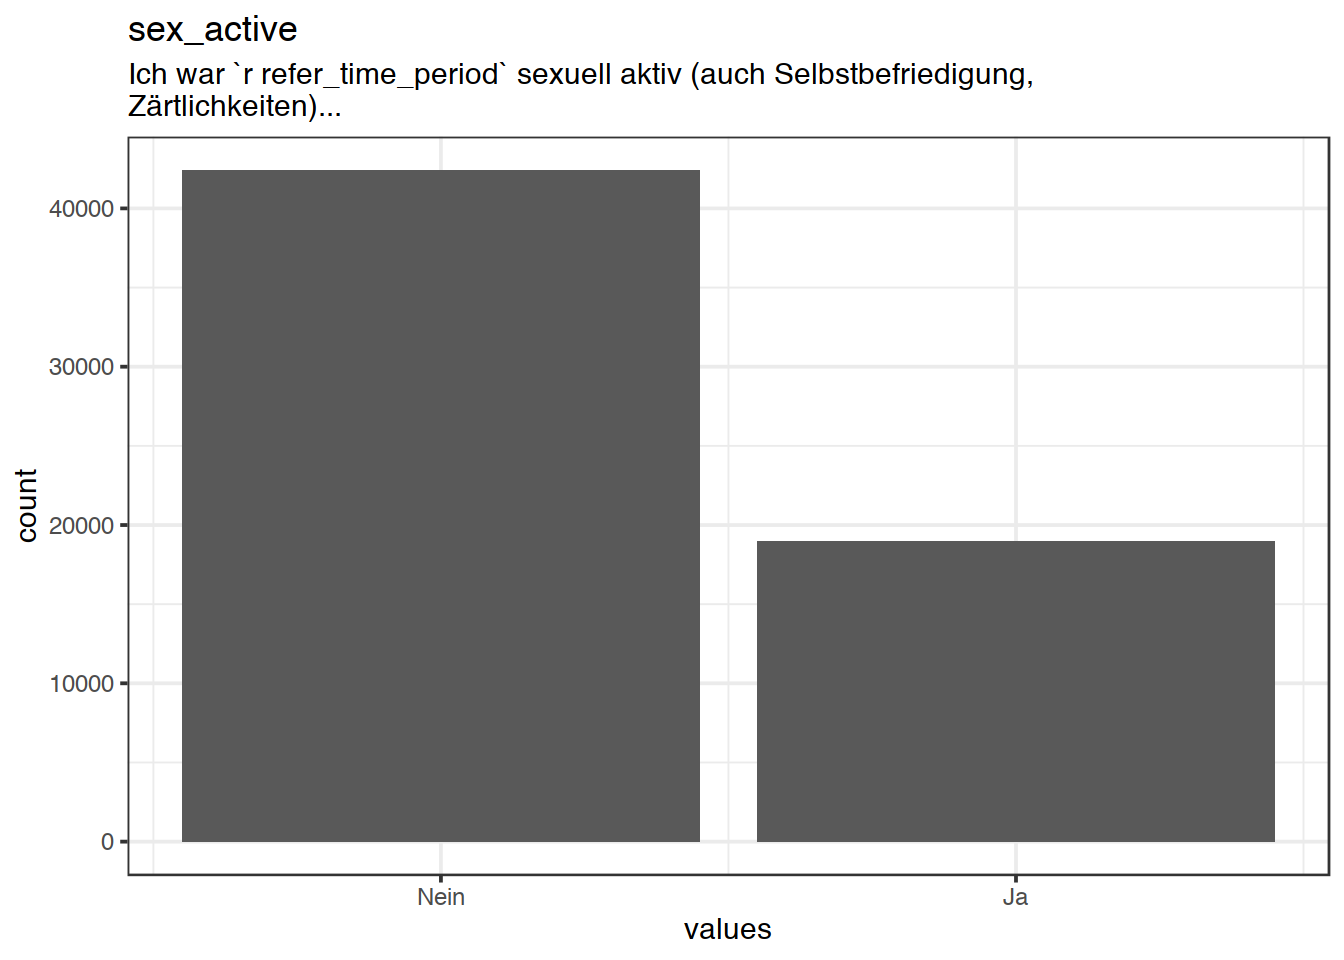 Distribution of values for sex_active